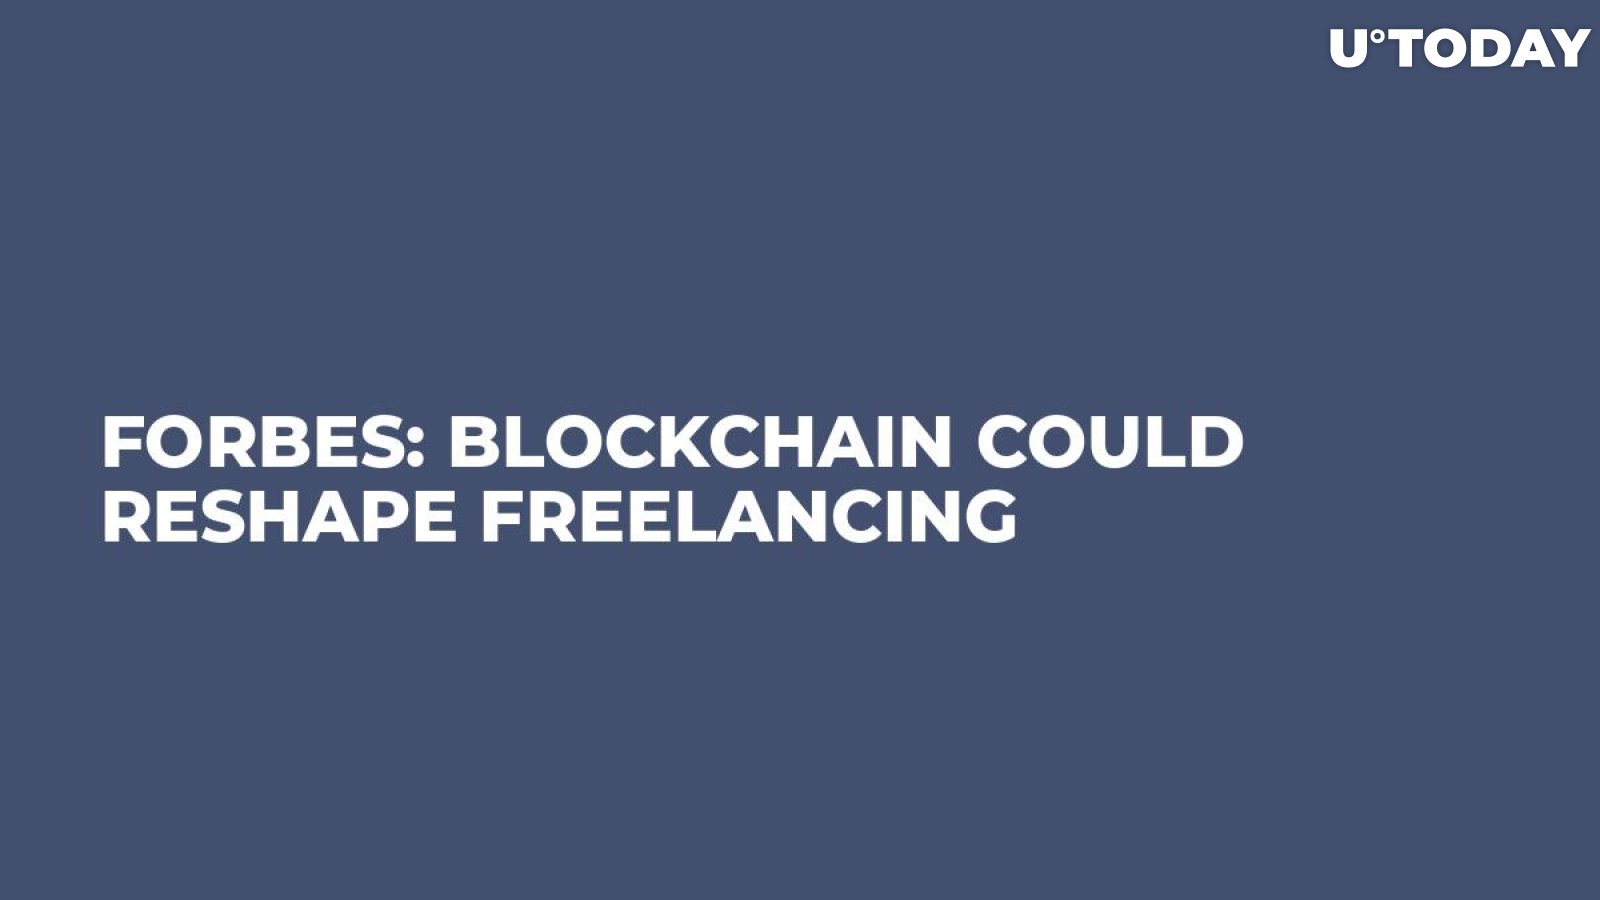 Forbes: Blockchain Could Reshape Freelancing